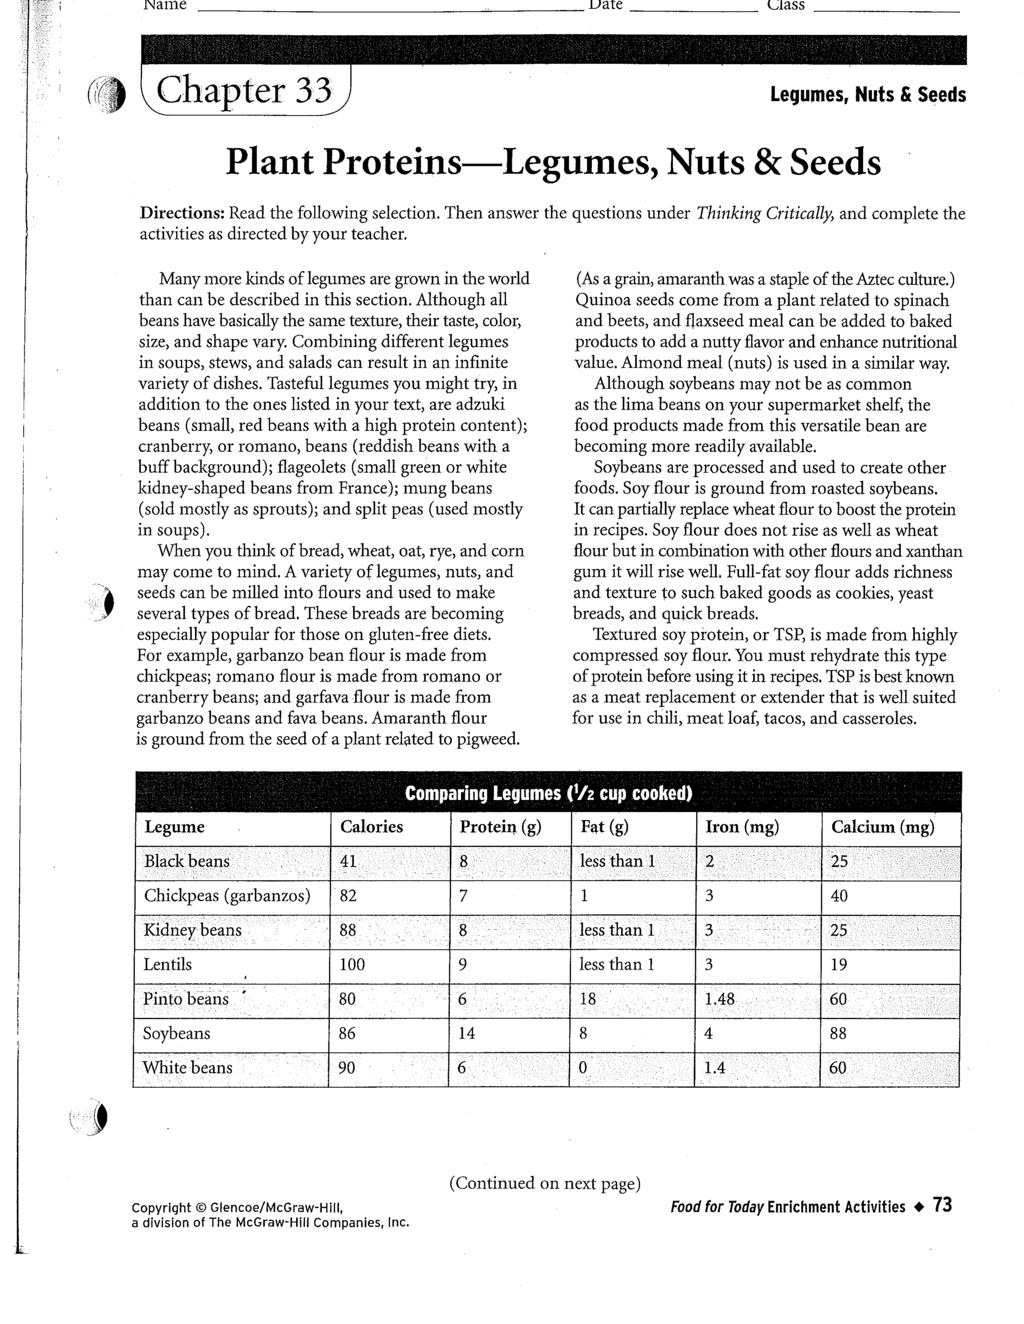 JName Jjate Cvlass Chapter 33 Legumes, Nuts & Seeds Plant Proteins Legumes, Nuts & Seeds Directions: Read the following selection.